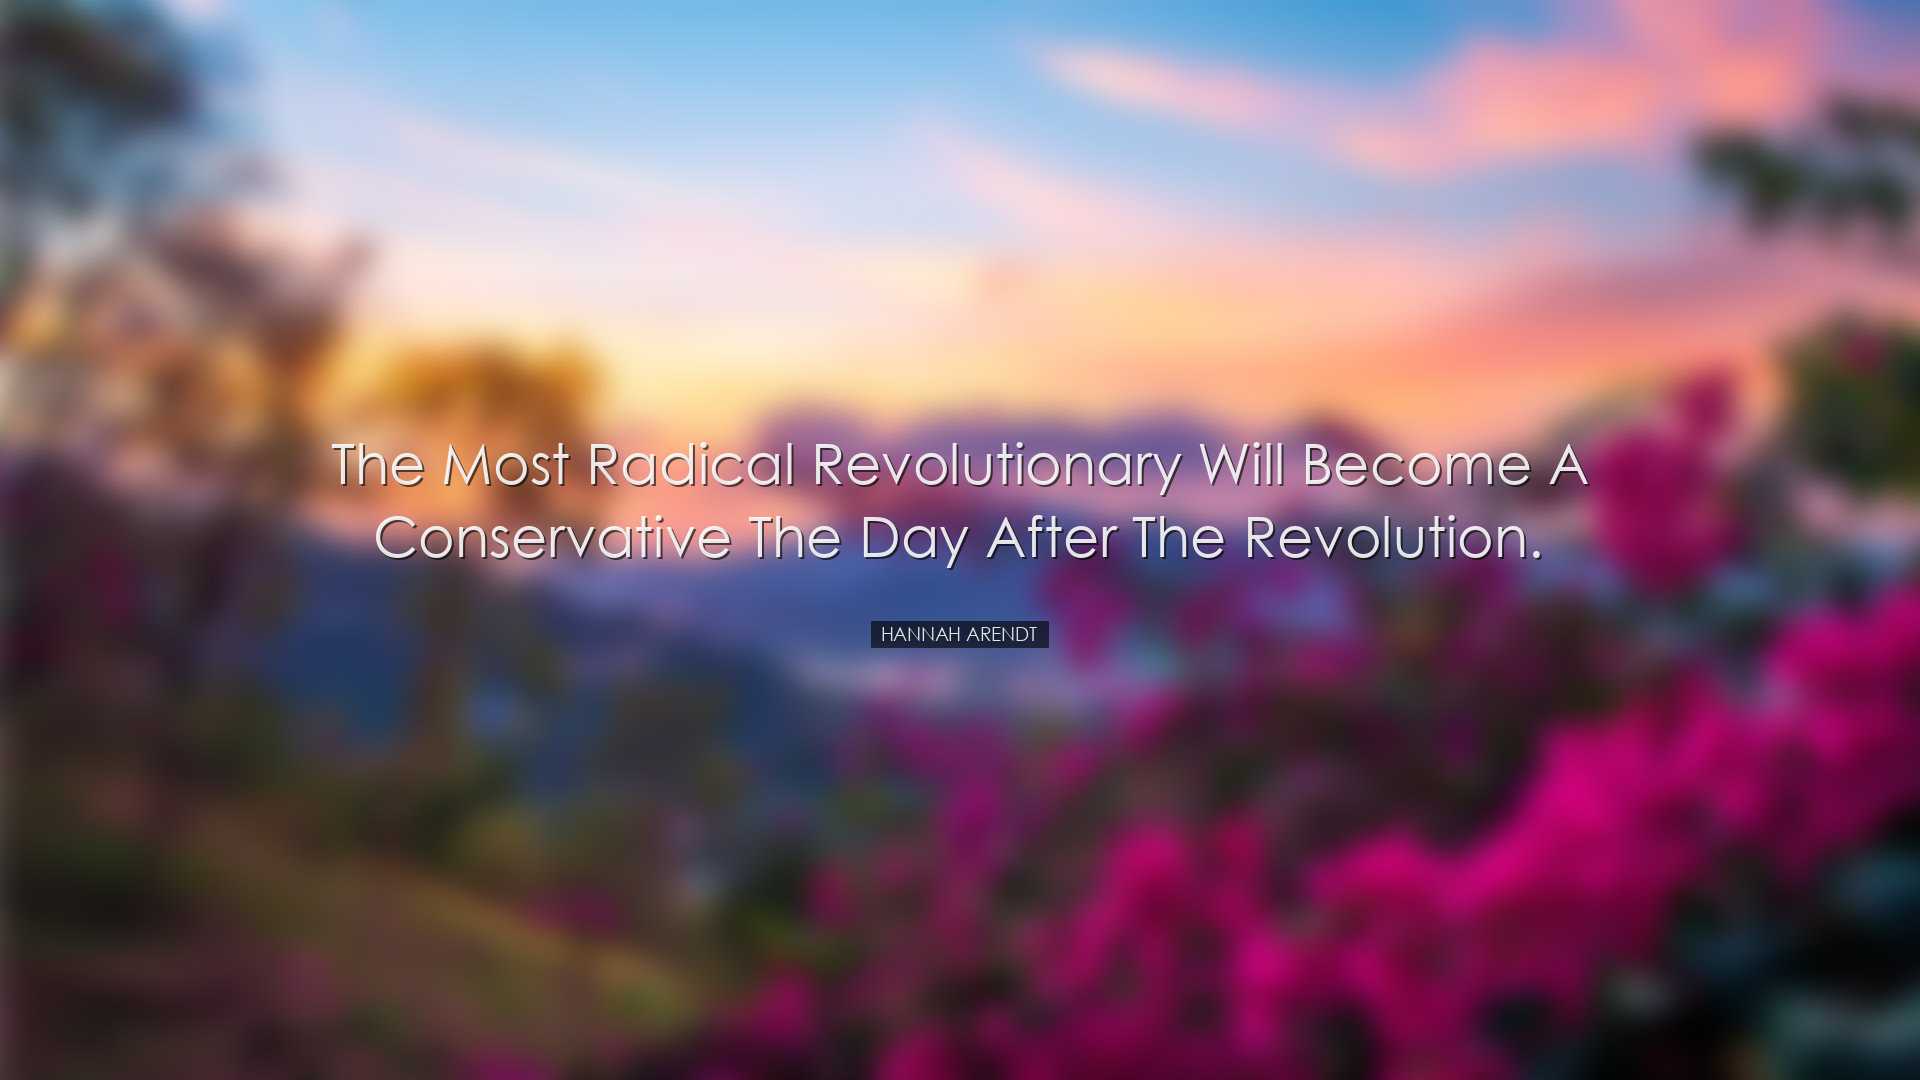 The most radical revolutionary will become a conservative the day